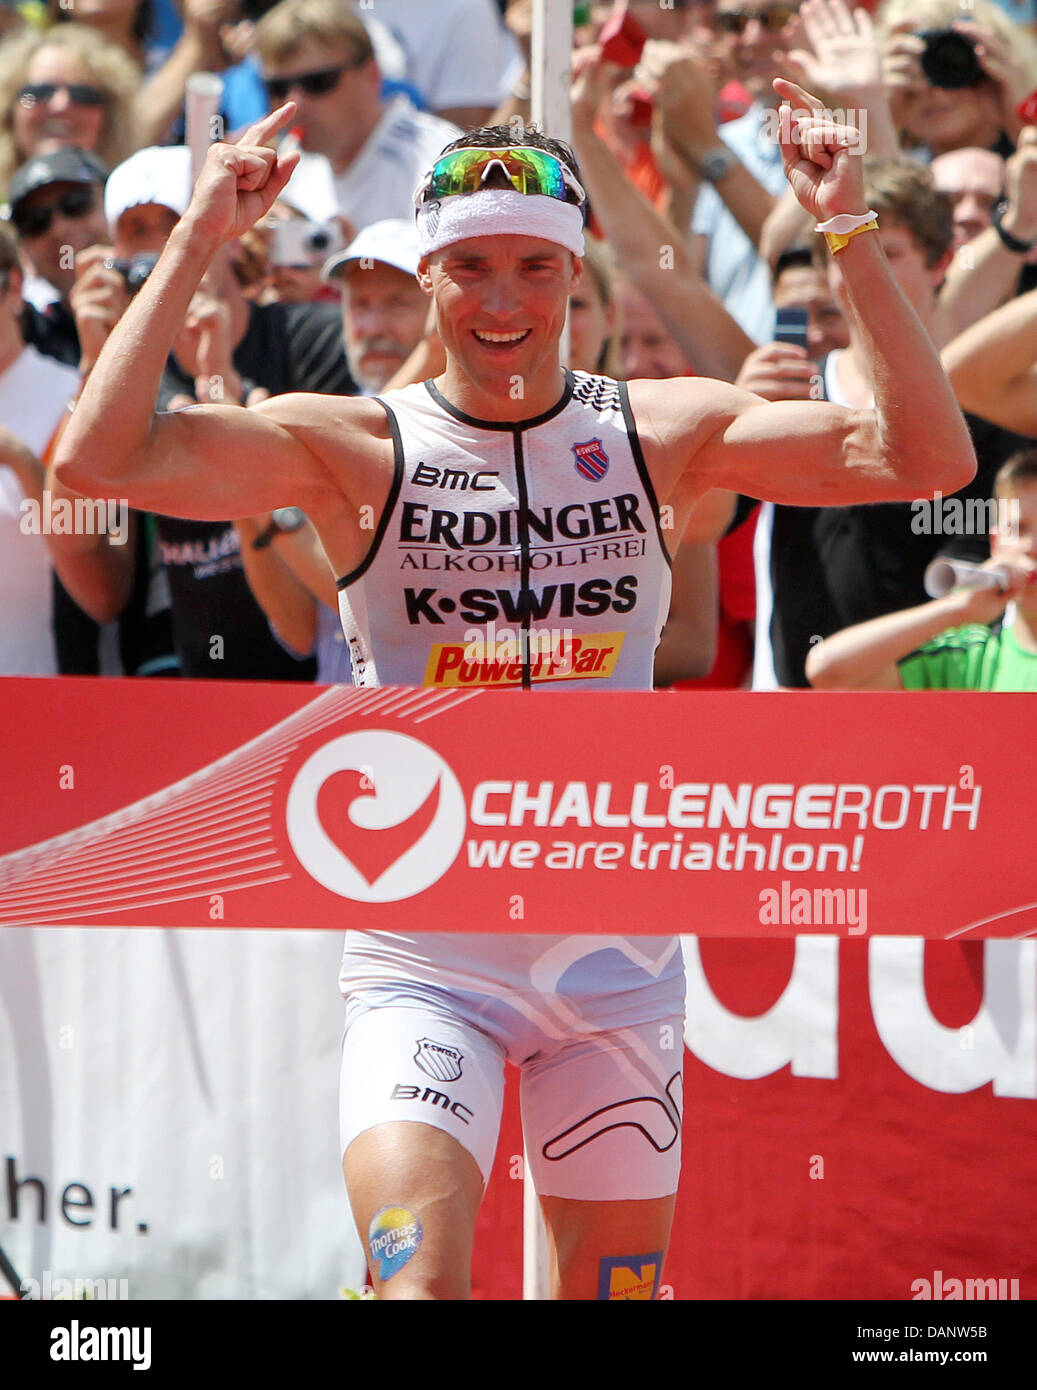 German triathlete Andreas Raelert cheers after the cycling etappe of the 10th Ironman Challenge in Hipoltstein, Germany, 10 July 2011. Andreas Raelert has won first place and made a new world record. For the ironman, the participants have to swim 3,8 km, cycle 180 km and run 42,195 km. Photo: Daniel Karmann Stock Photo